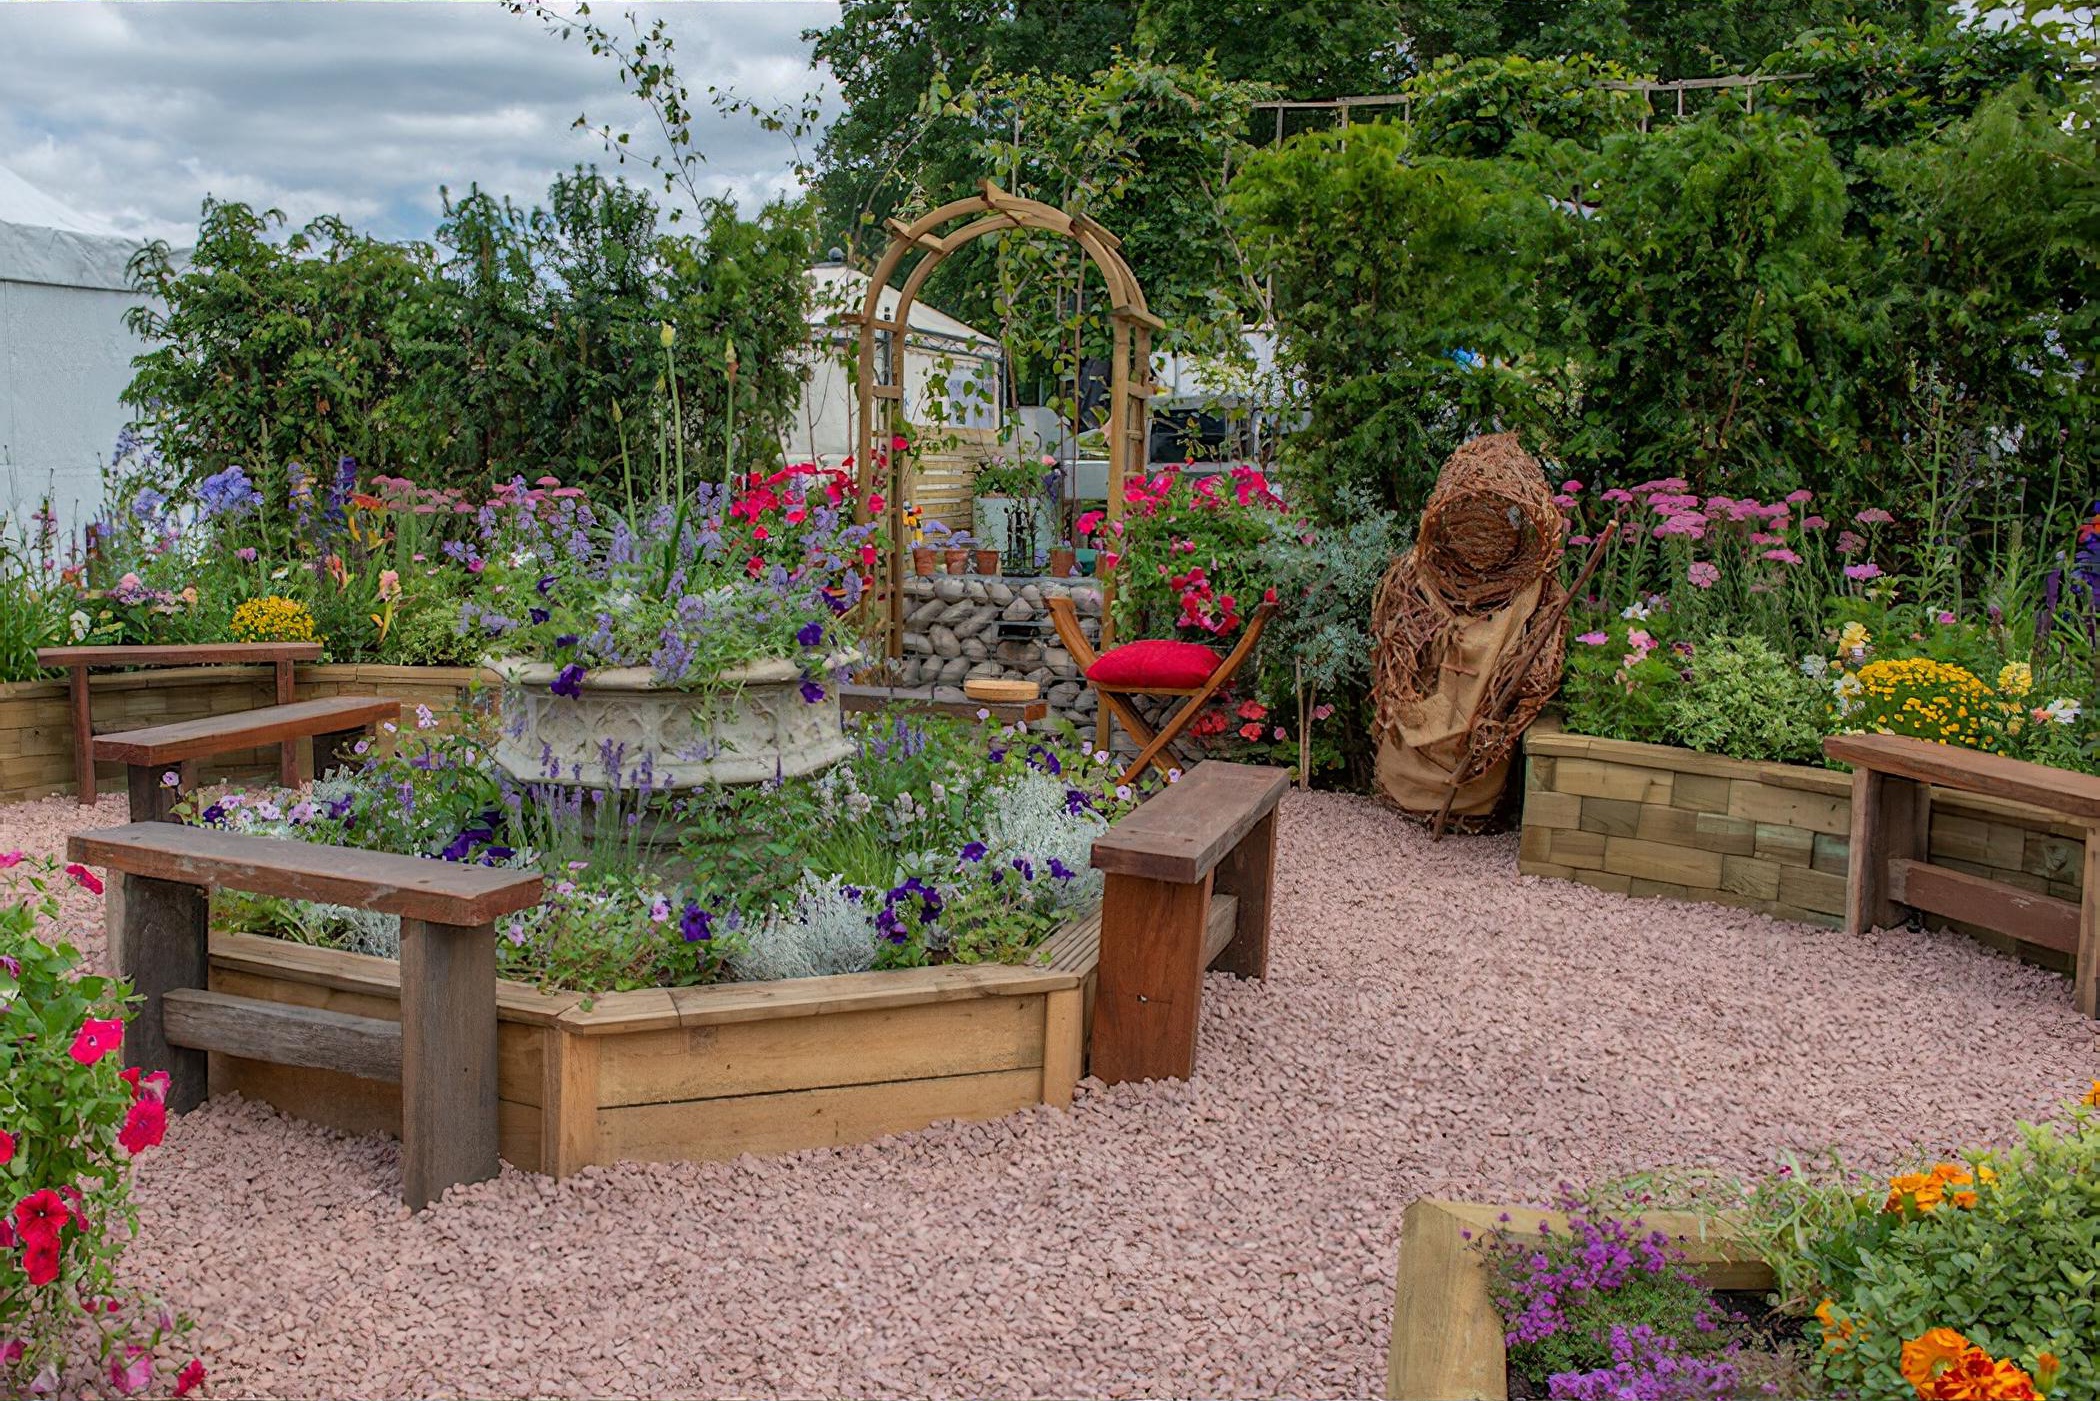 Southend Young Offenders ' A Place to Think' Garden RHS Hampton Court Flower Show 2019 by Garden Designer Tony Wagstaff